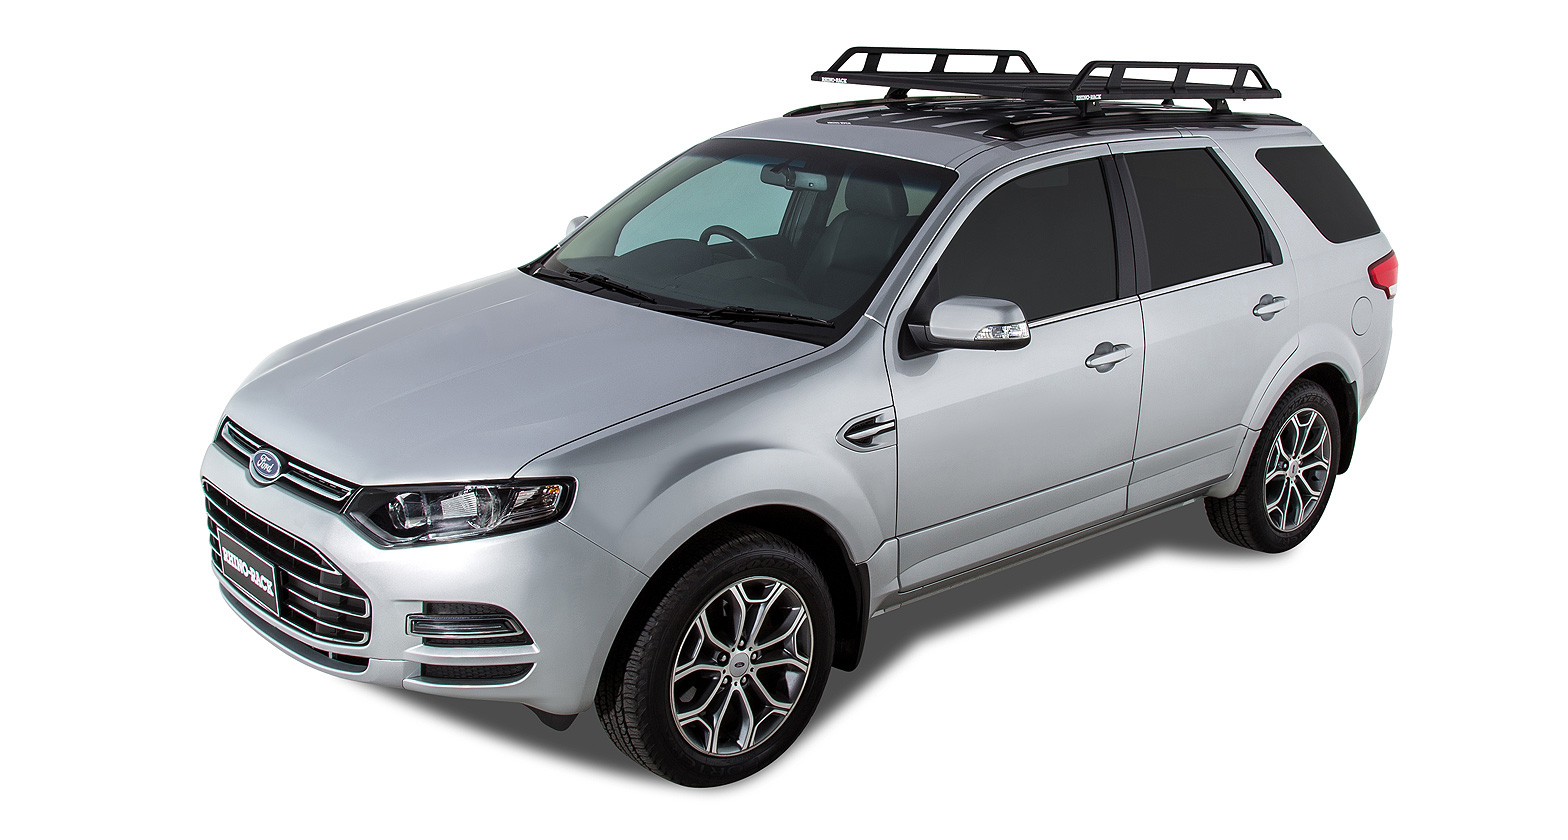 Rhino Rack JA9662 Pioneer Tradie (1528mm x 1236mm) for Ford Territory SX-SZ 5dr SUV with Flush Roof Rail (2004 to 2016) - Factory Point Mount